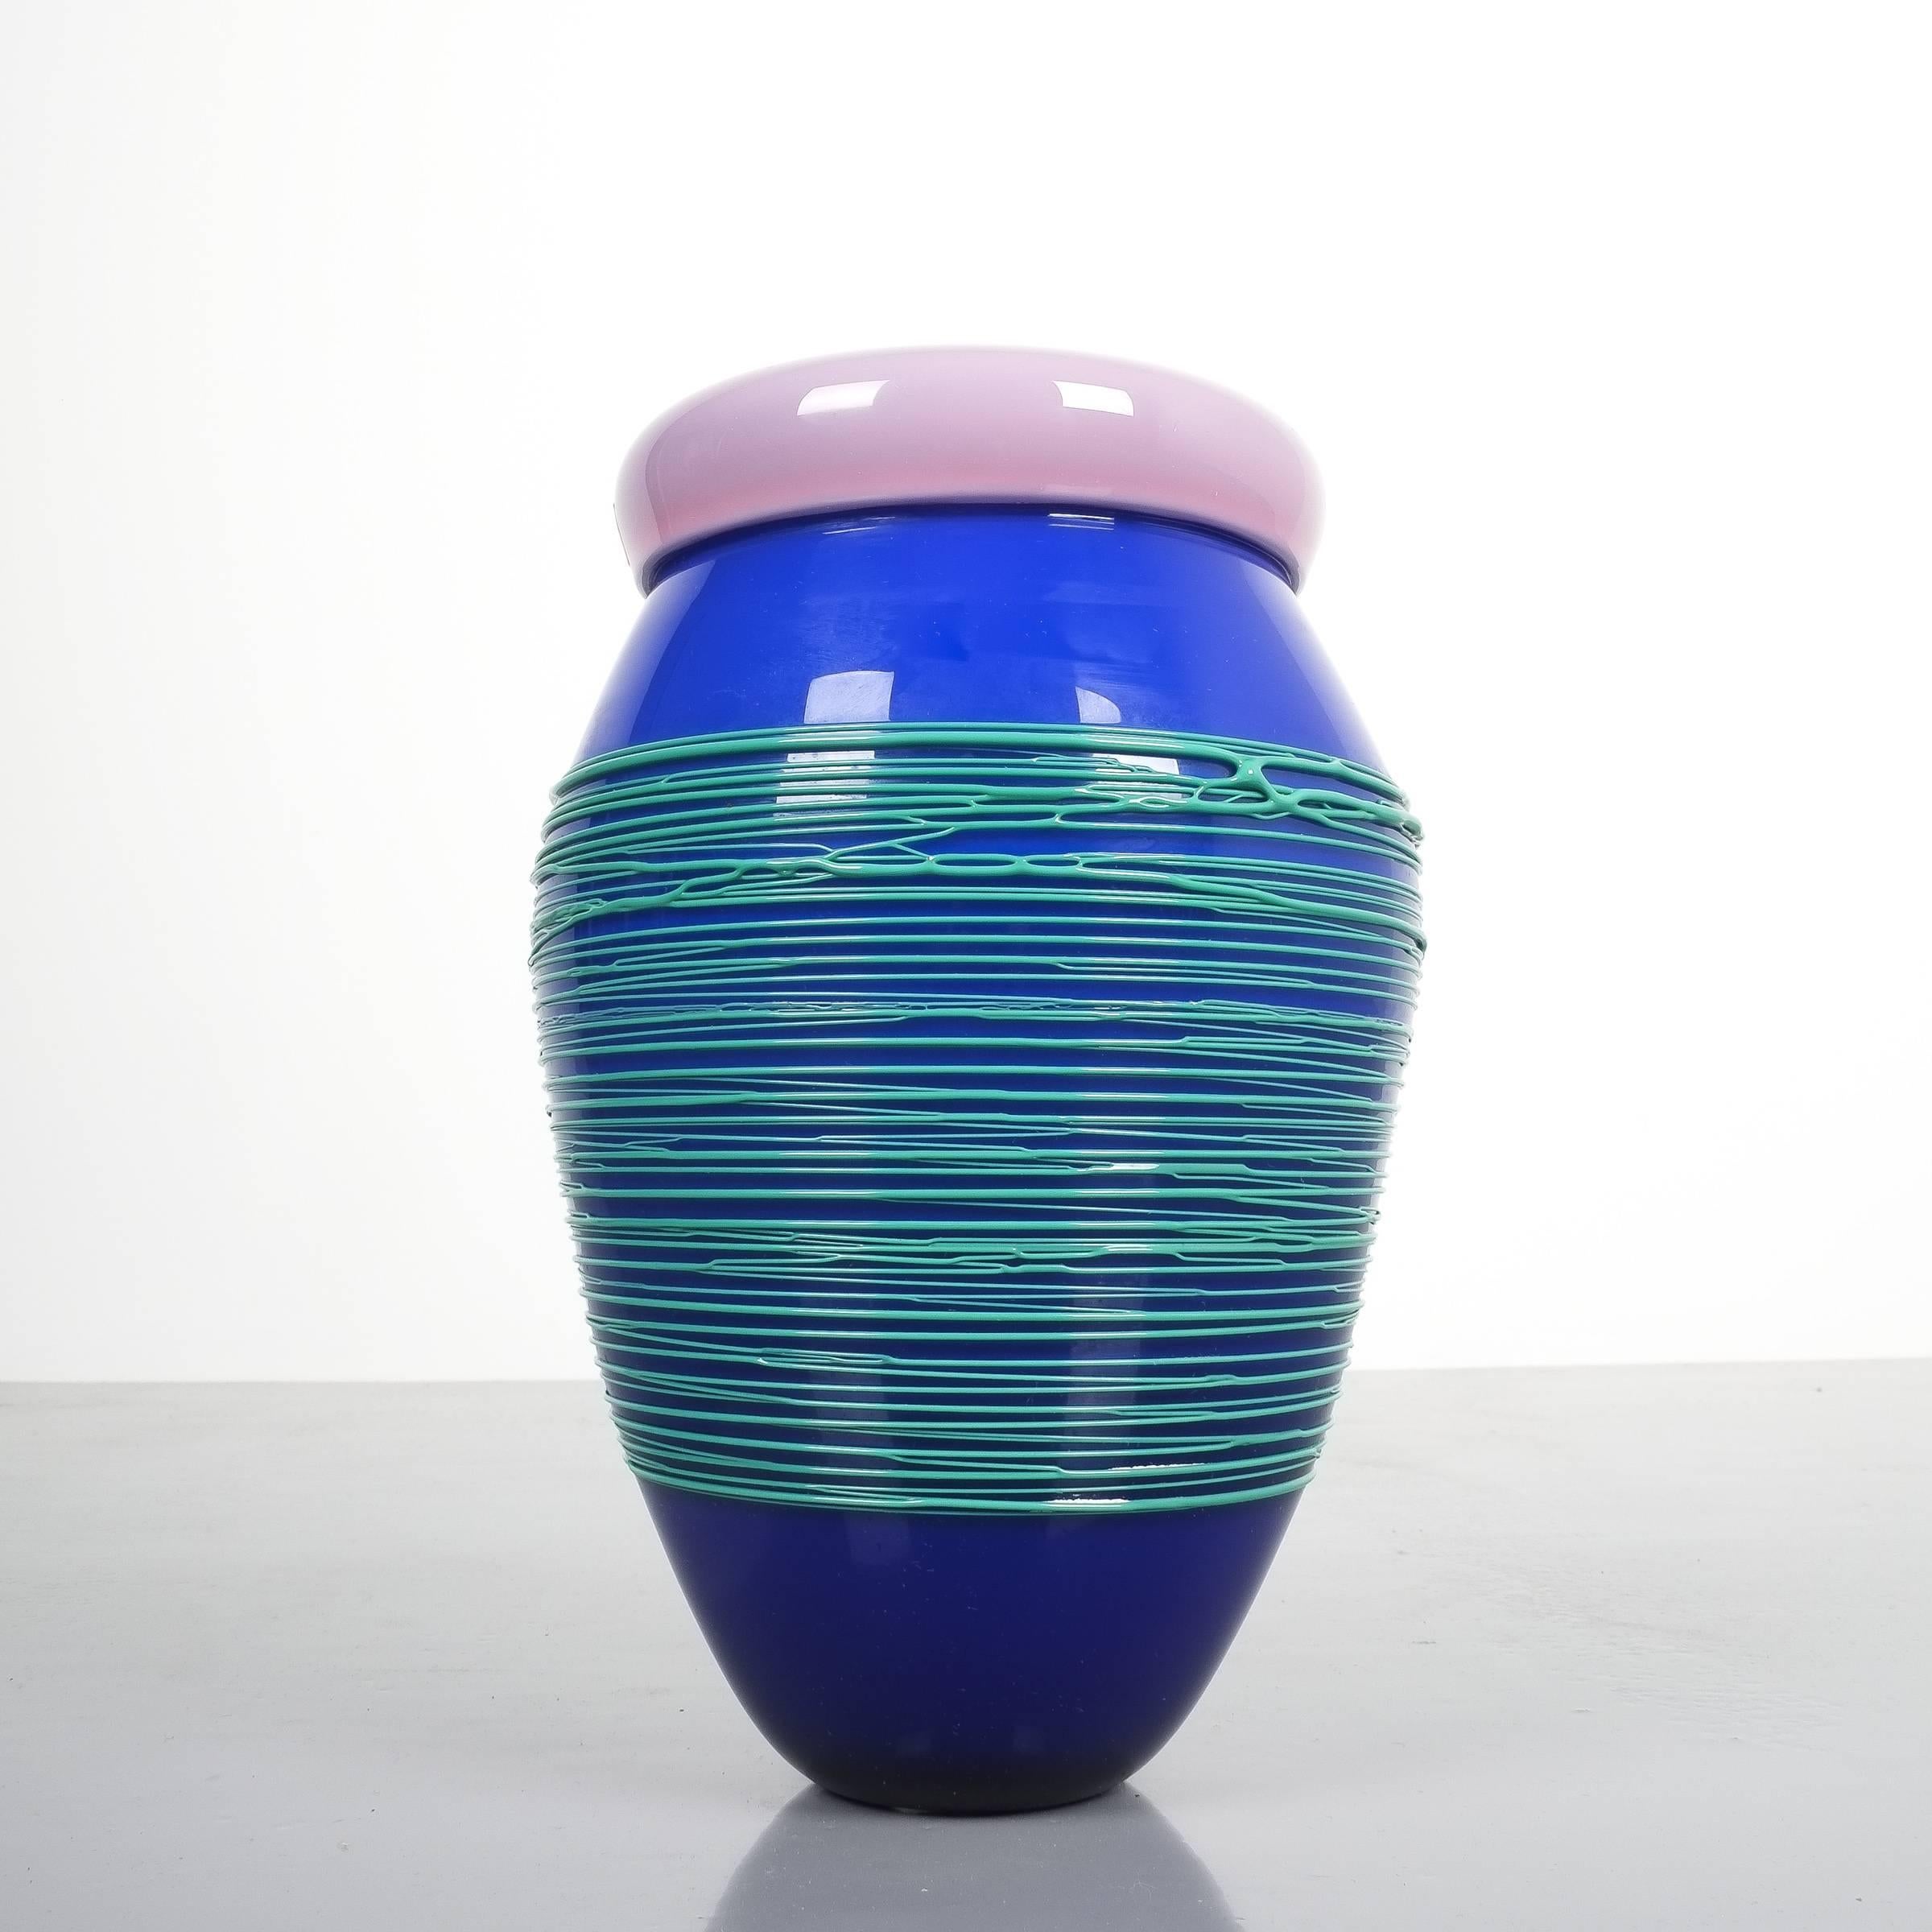 Toots Zinsky Chiacchiera Venini vase, Italy, 1990. Incamiciato glass with applied threading Incised signature to underside: Zinsky x Venini 90. Signed with decal manufacturer's label to lip: Venini Murano Made in Italy. Excellent condition, no